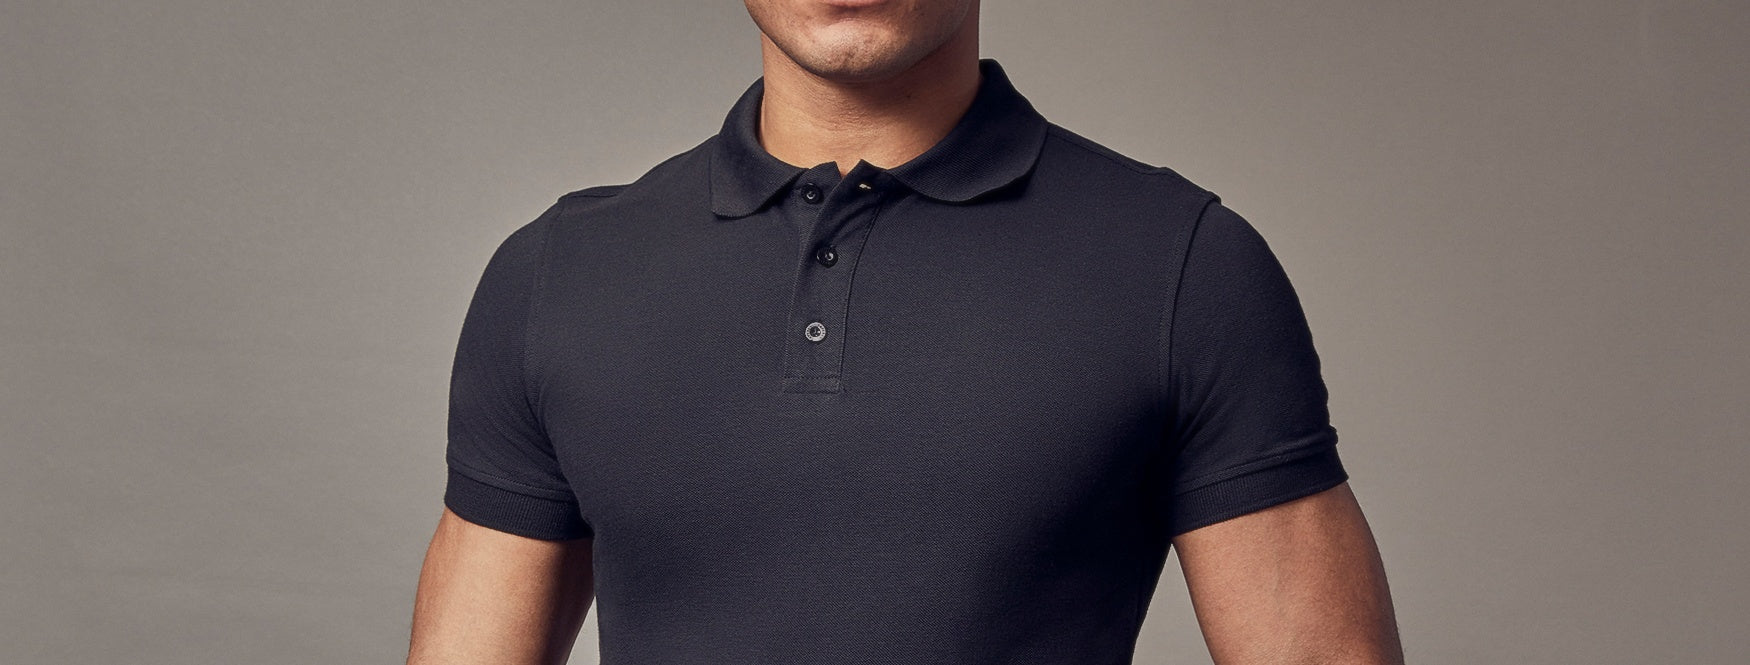 What To Wear With a Black Polo Shirt by Tapered Menswear